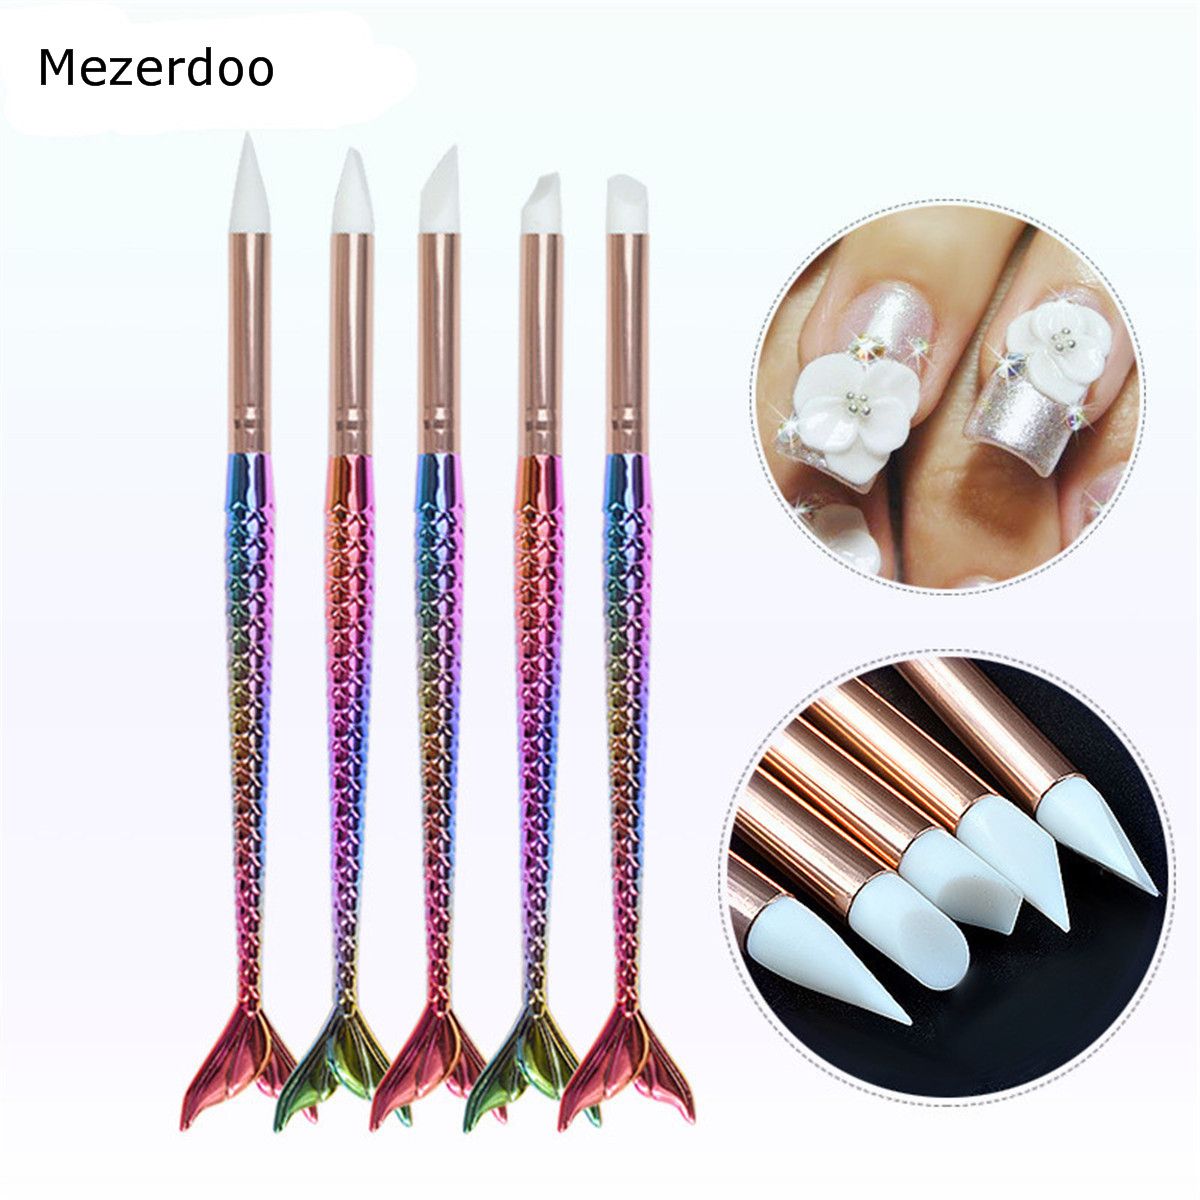 Silicone Nail Tool Brush Dotting Sculpture Painting Moulding Pen Carving  Craft Mermaid Nails Brushes Nail Art Decoration 5pc/lot